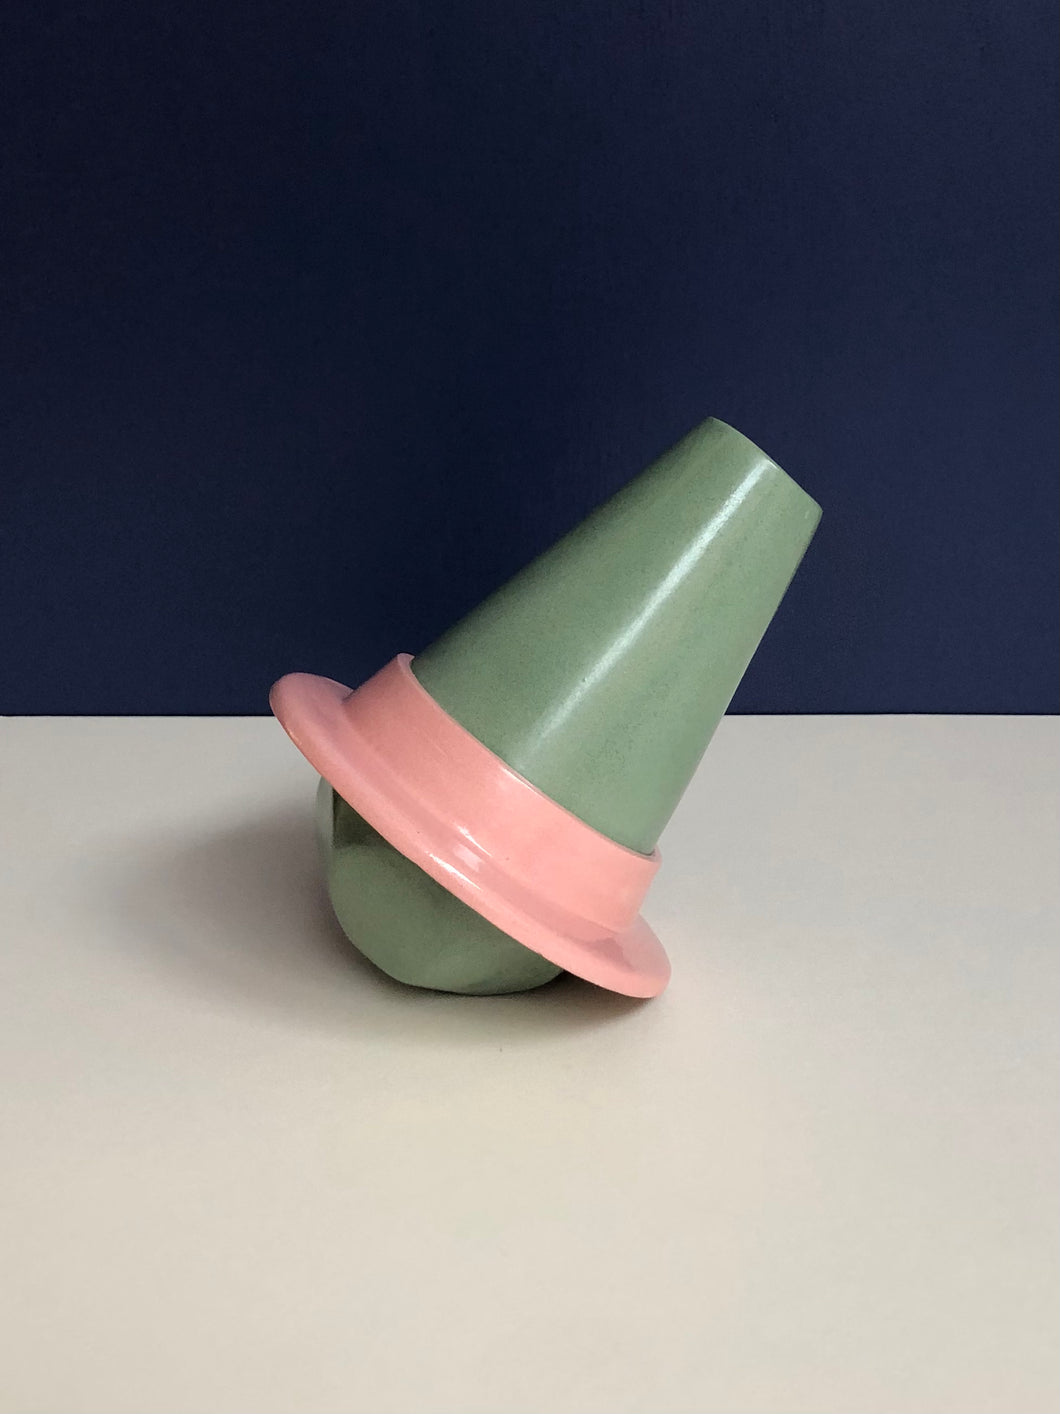 TABLE TUMBLER small green/pink